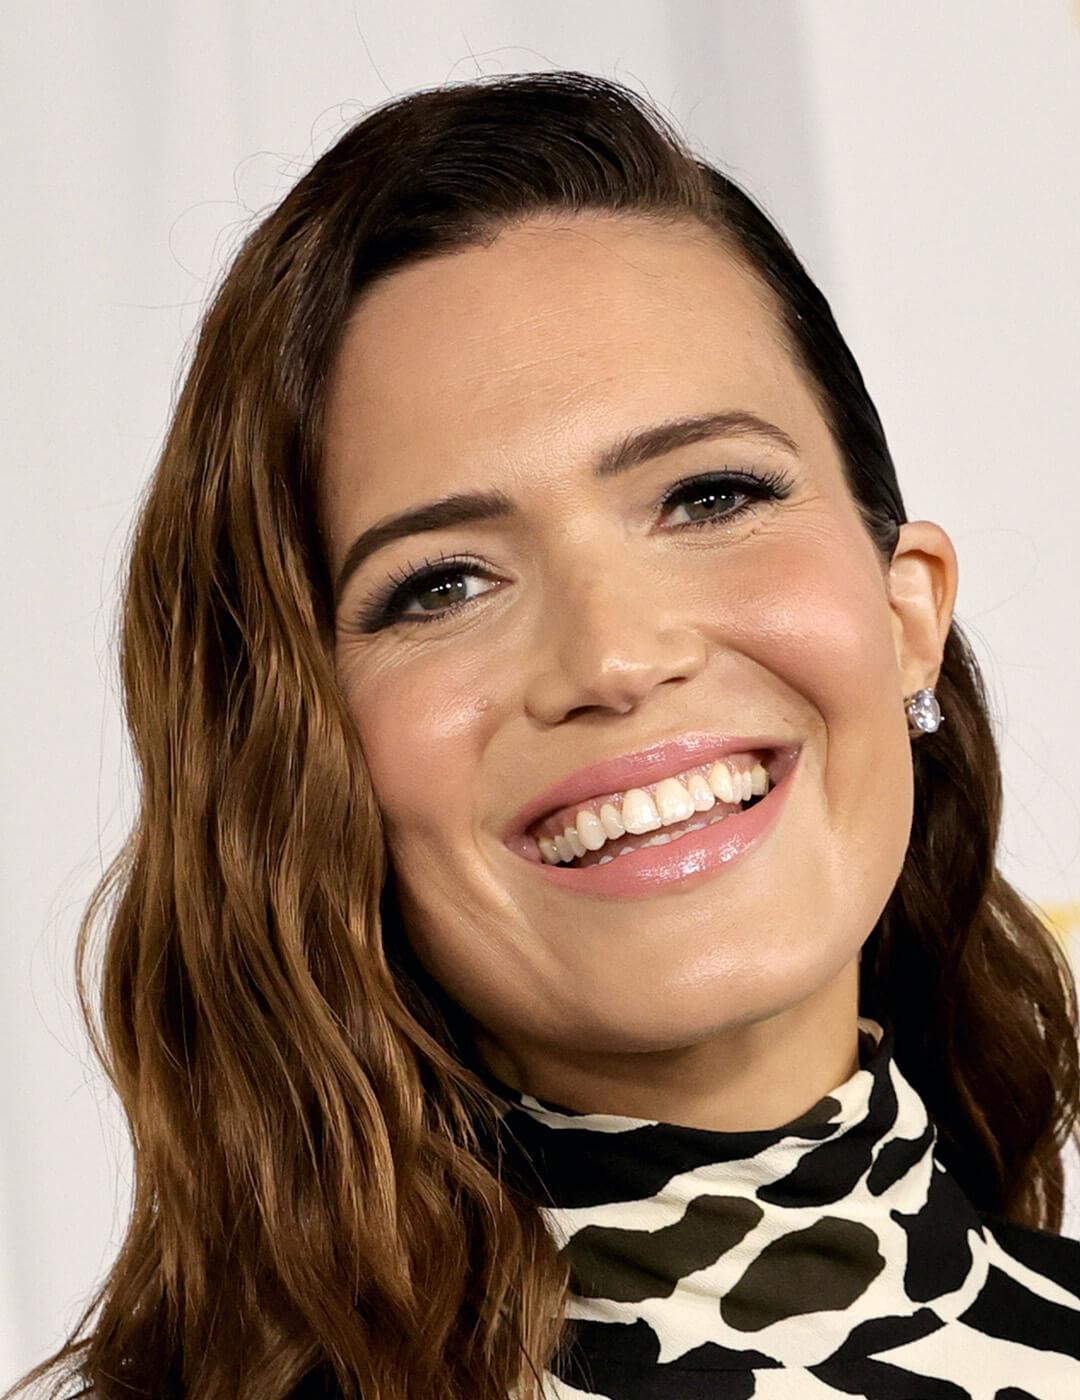 Close-up of Mandy Moore smiling at the camera rocking light pink gloss wearing a printed black and white dress complemented by her diamond earrings